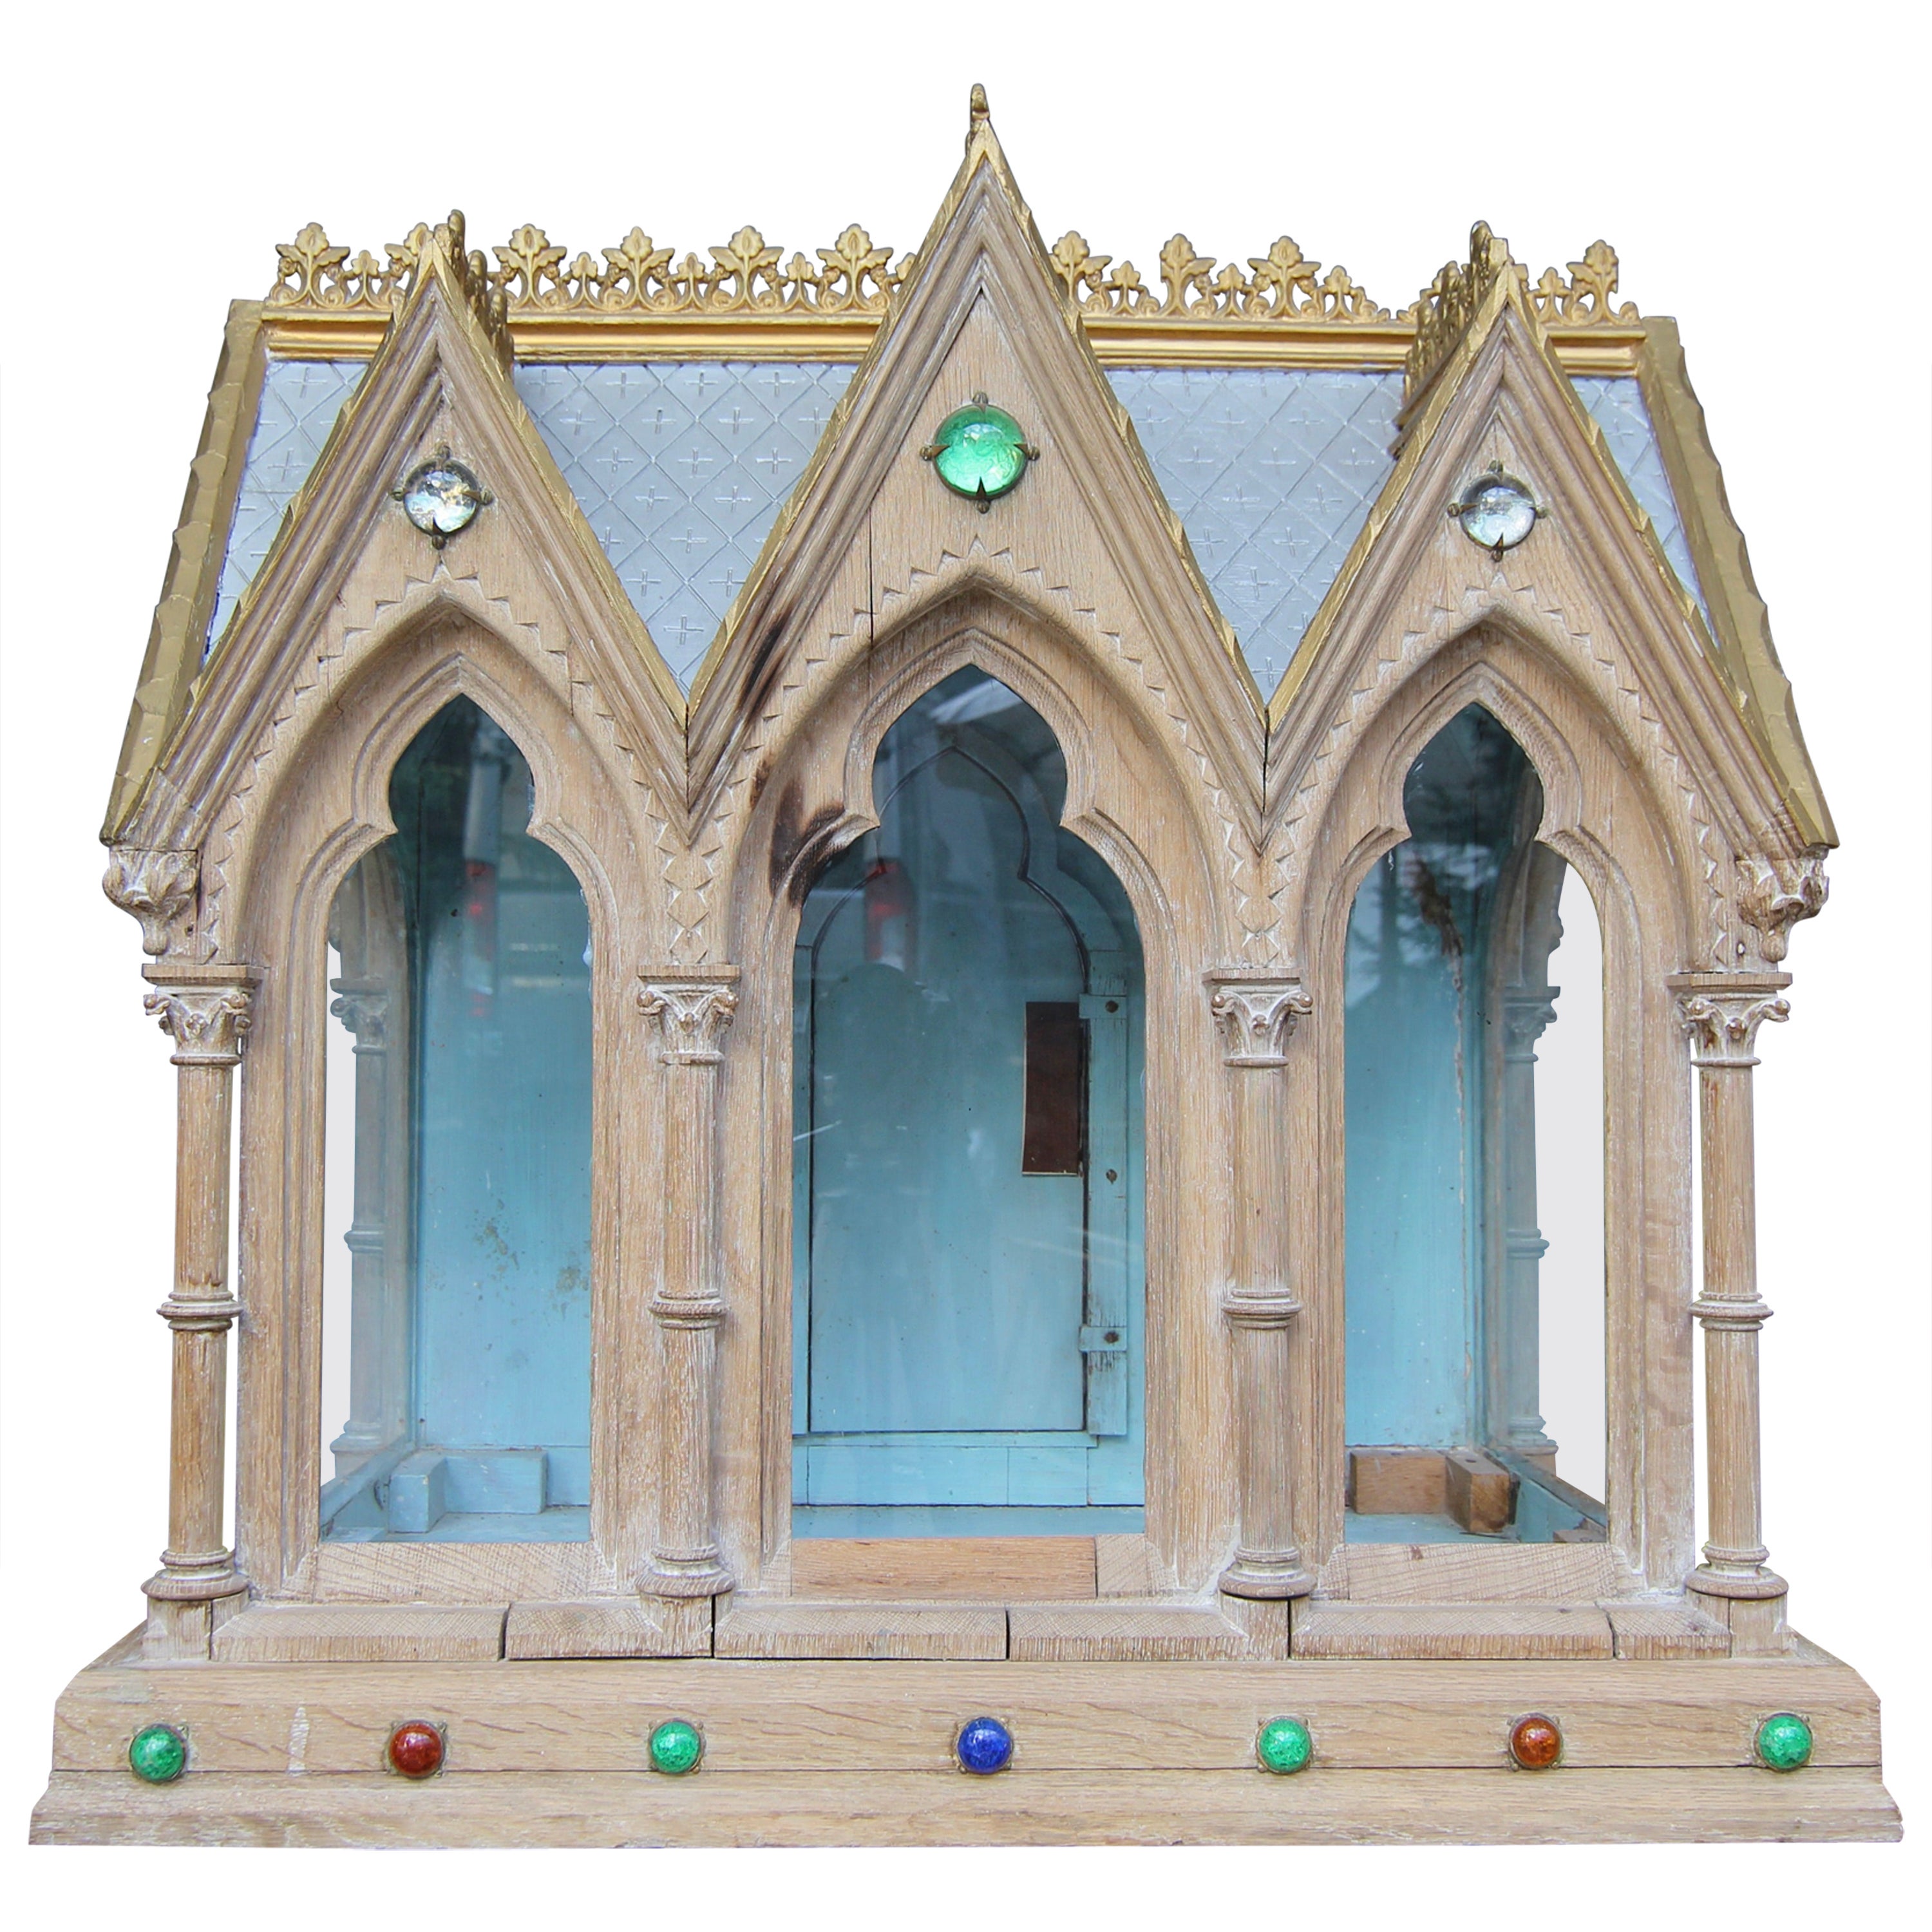 Late 19th Century Gothic Revival Reliquary Casket